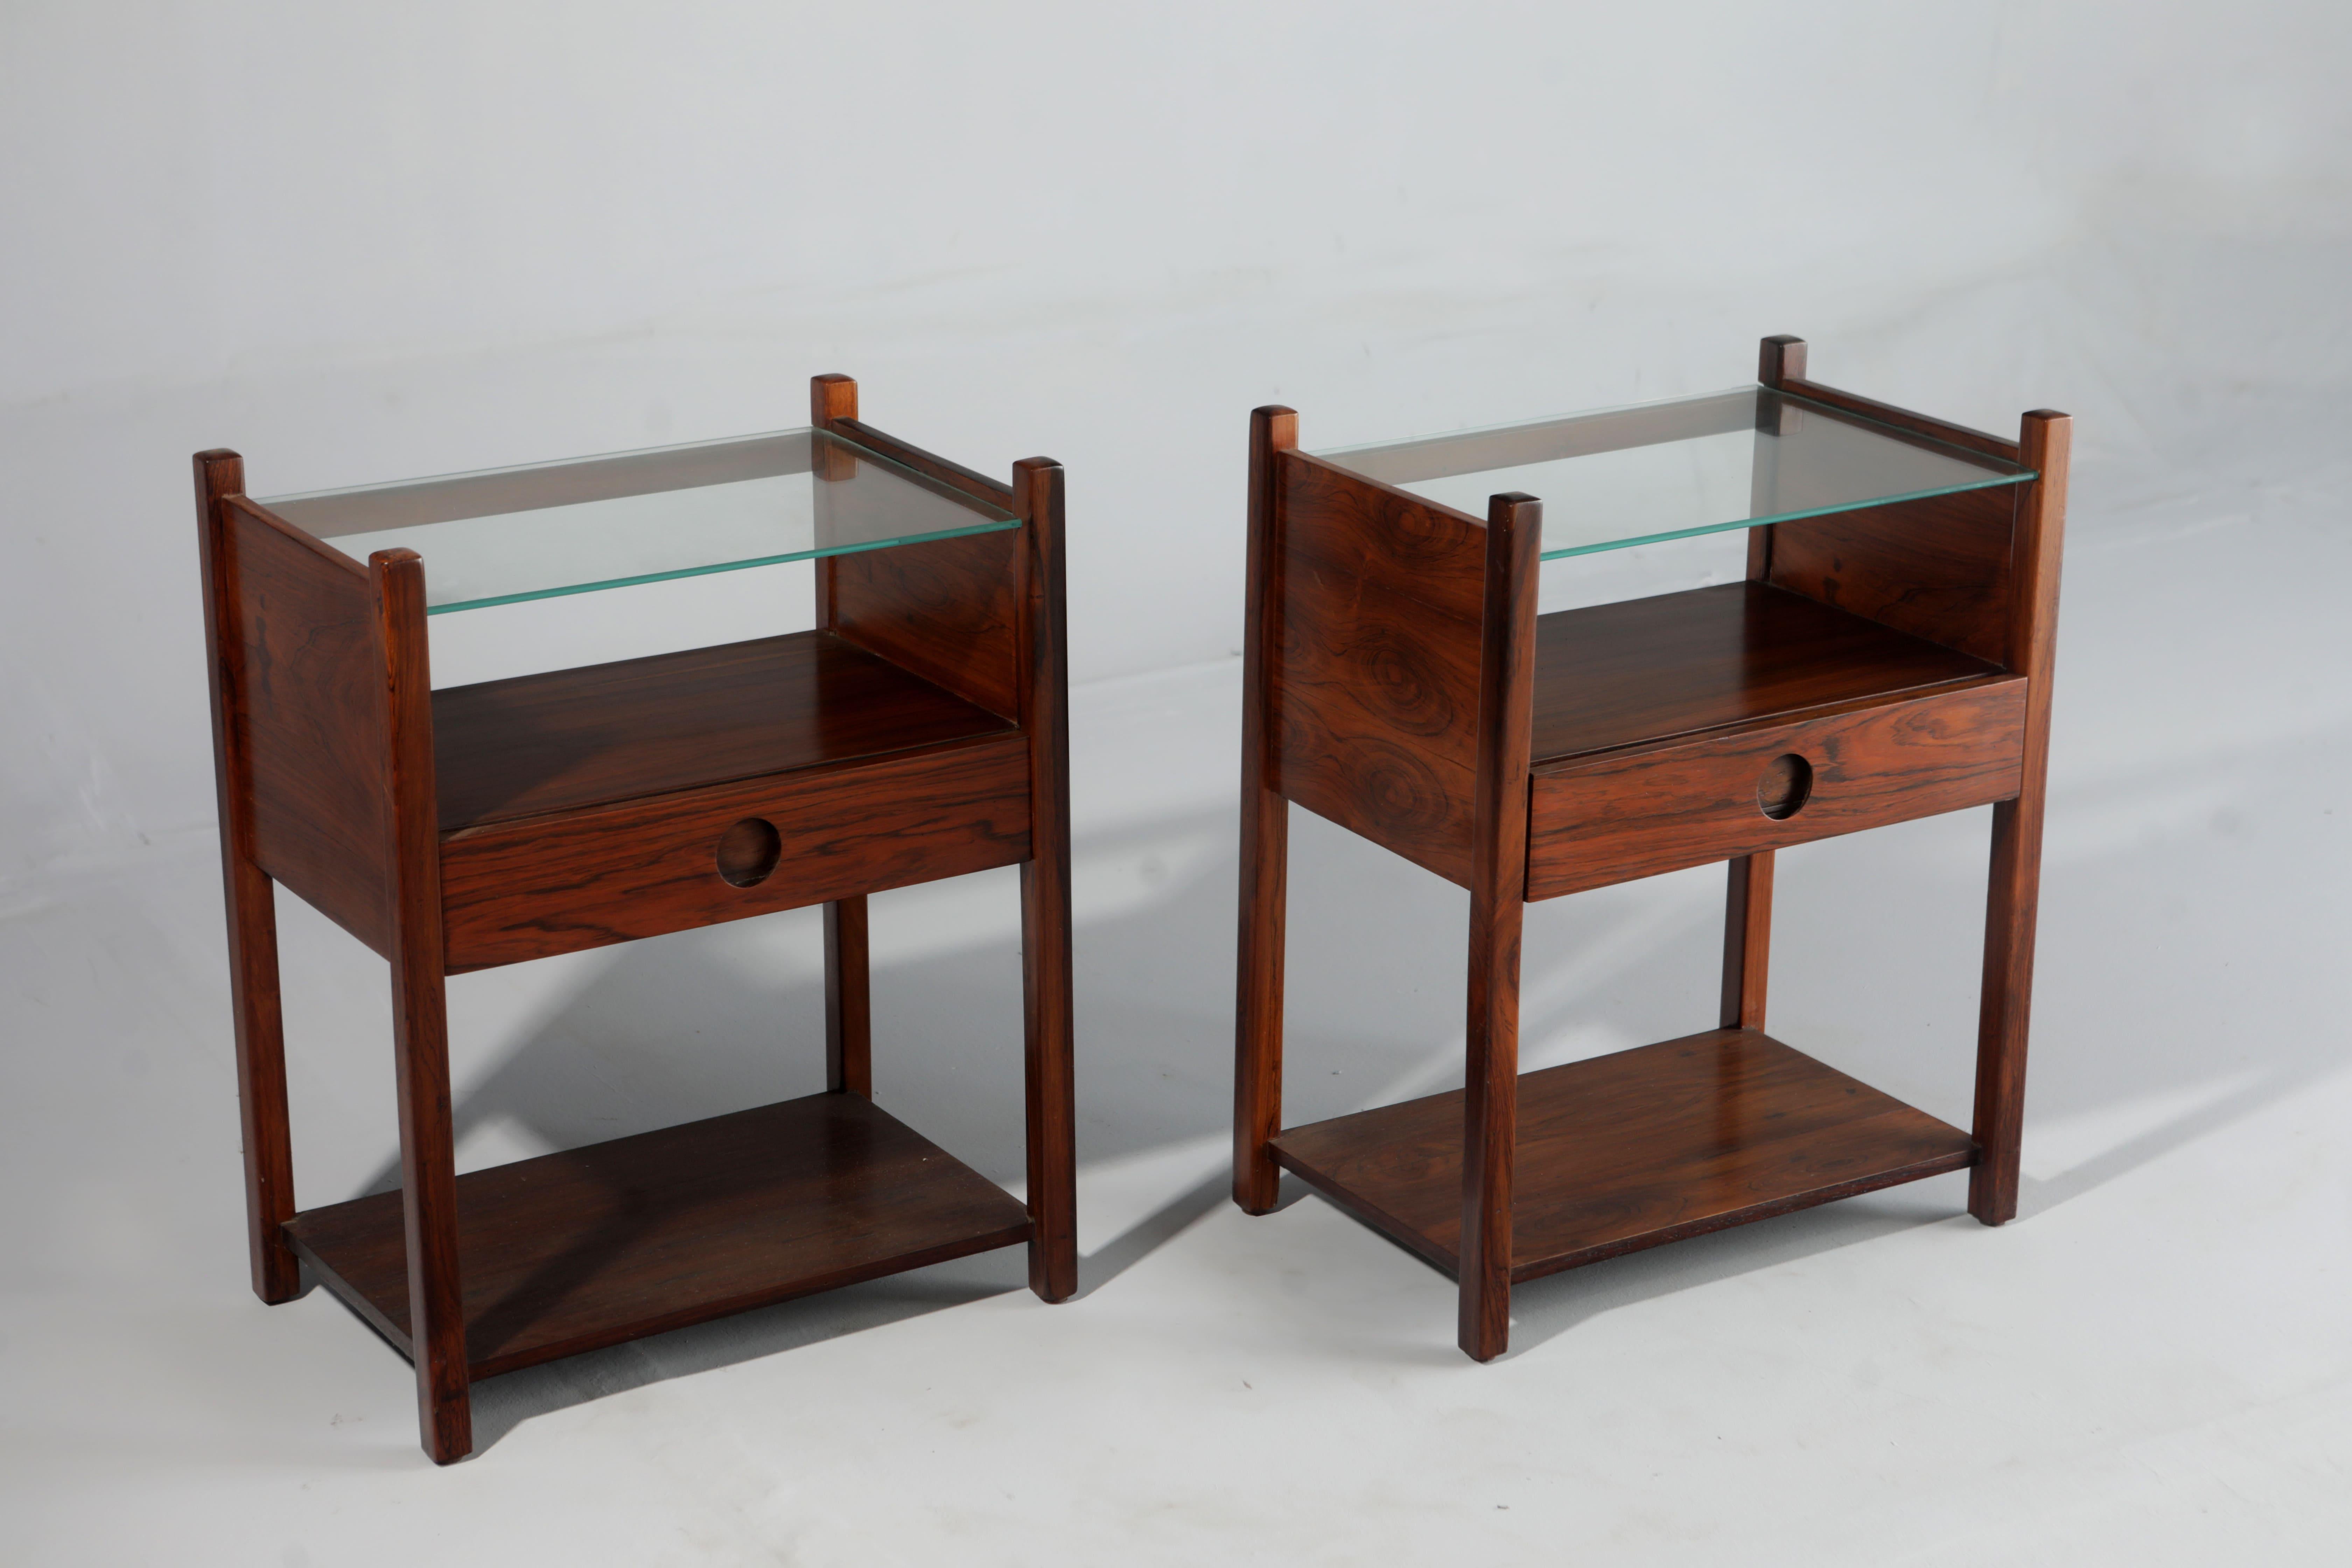 Metalwork Set of Two Mid-Century Modern “Yara“ Bedside Tables by Sergio Rodrigues, Brazil